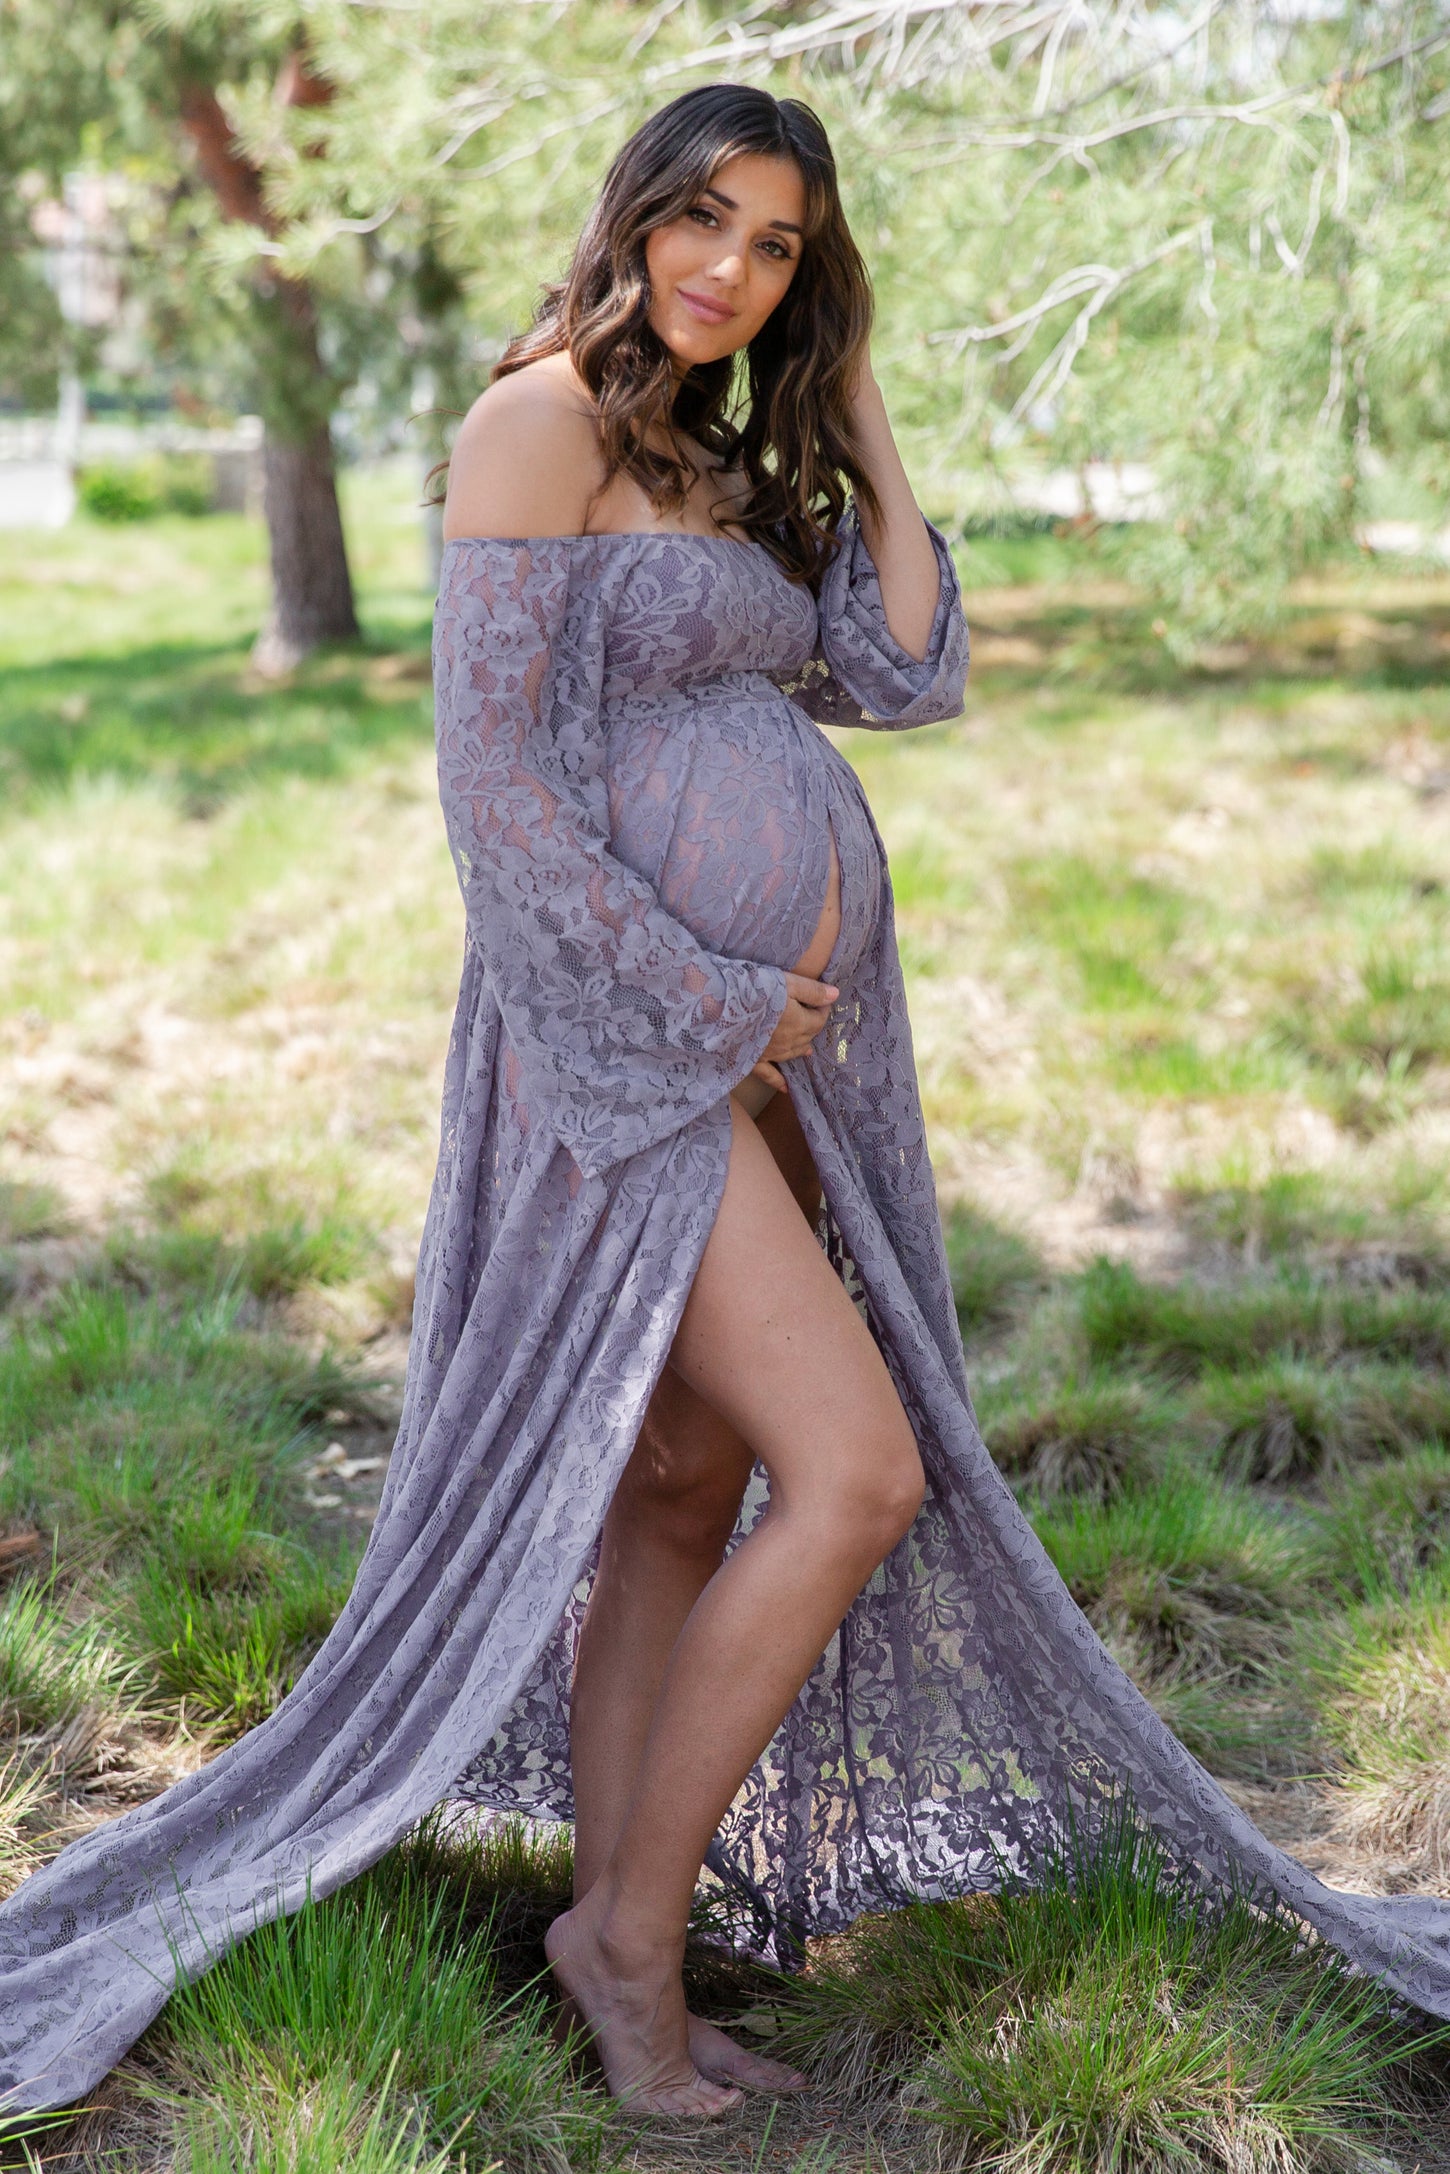 PinkBlush Lavender Lace Off Shoulder Maternity Photoshoot Gown/Dress